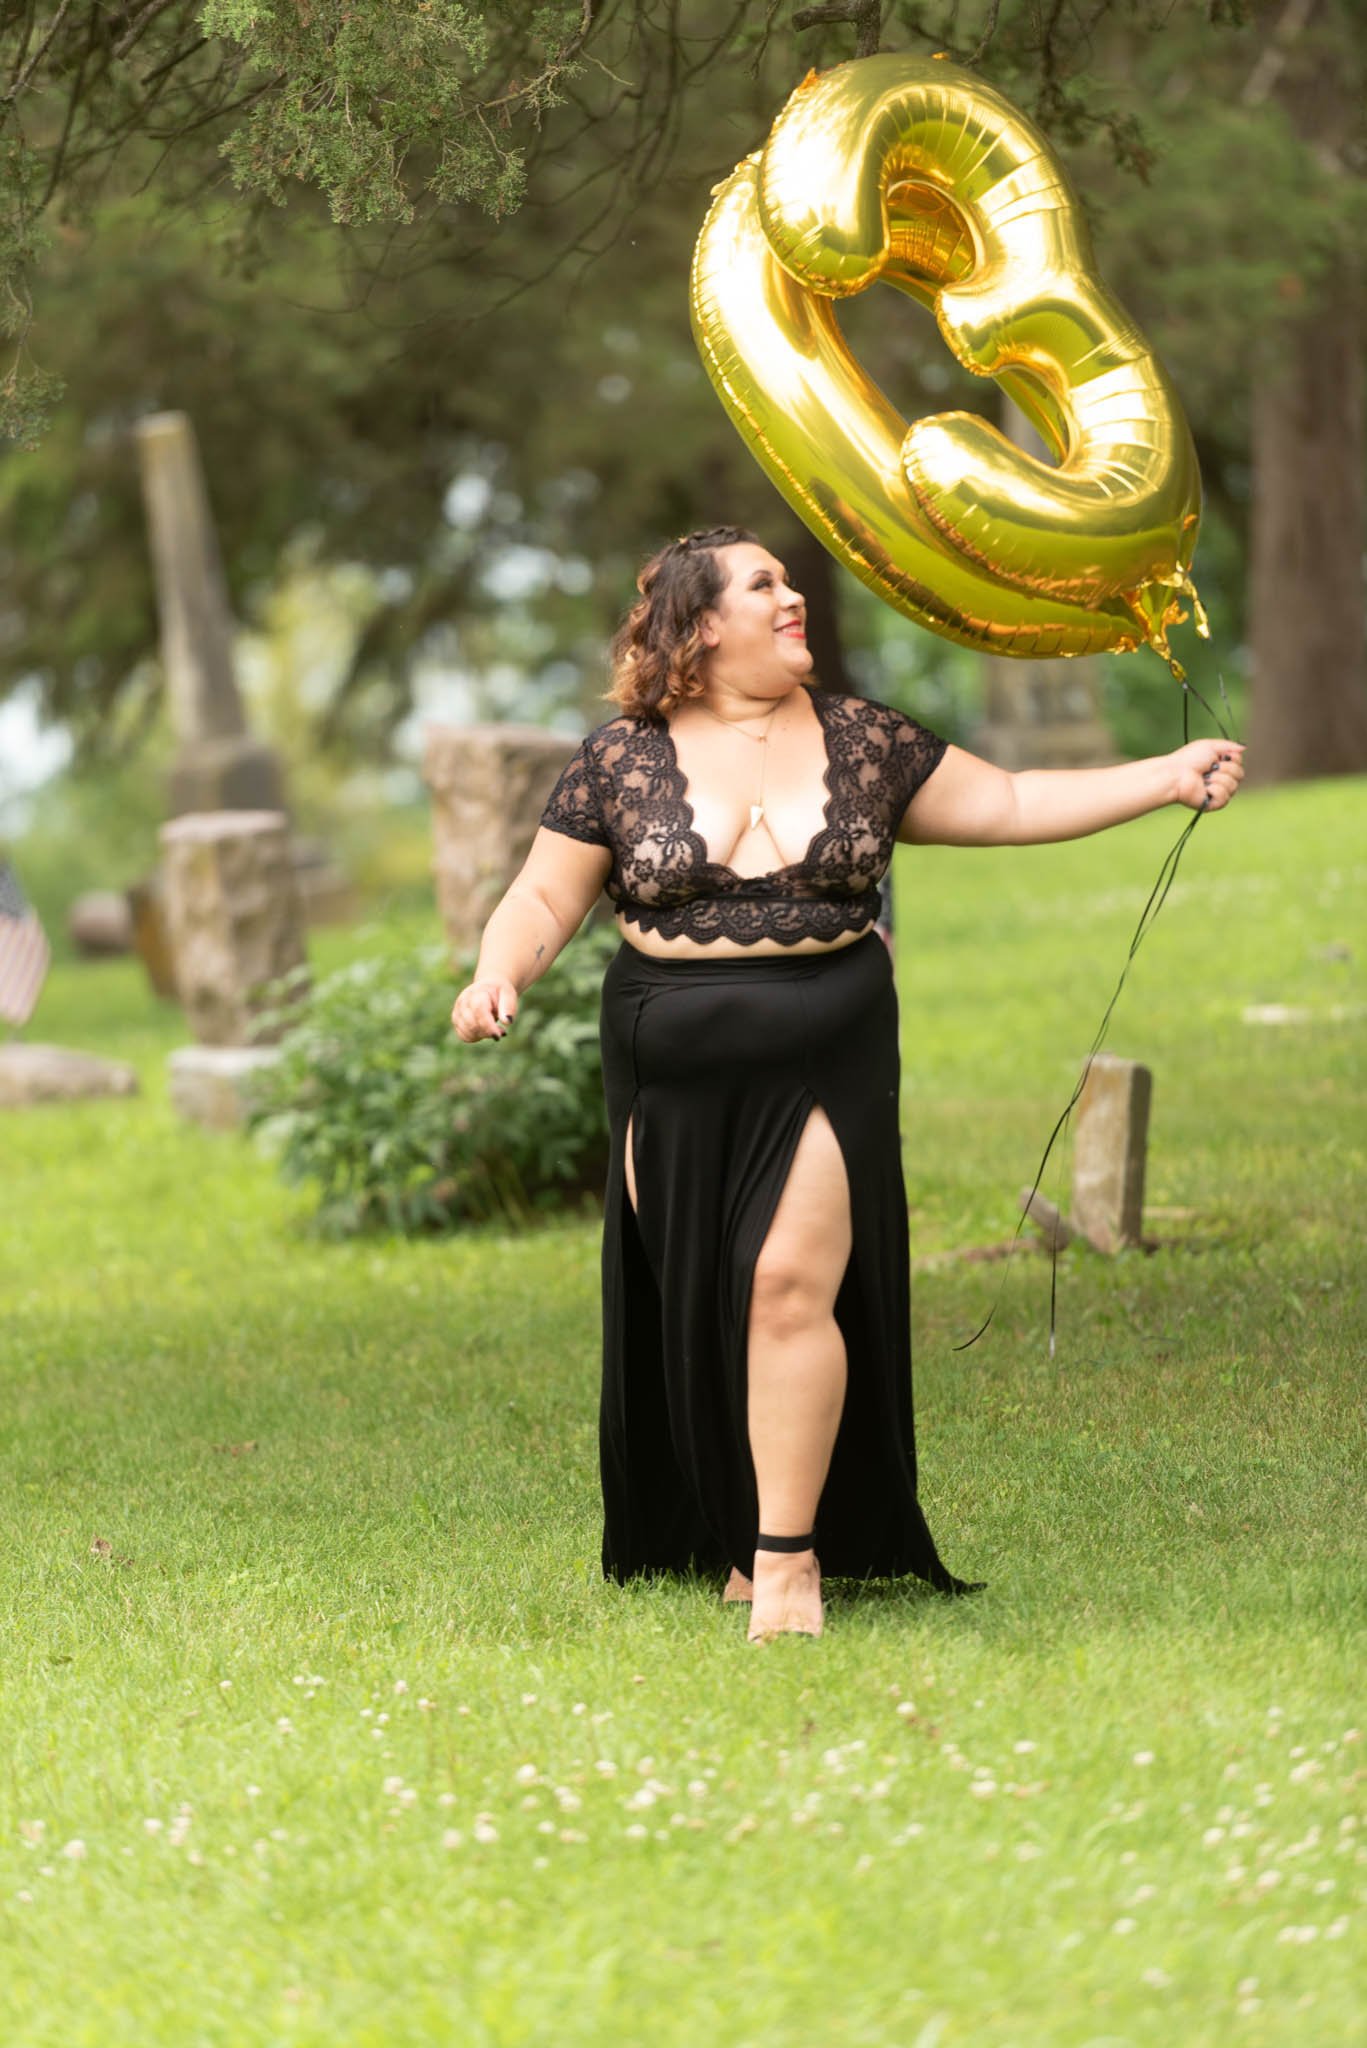  Samantha in black dress walks through cemetery carrying foil letter balloons and looks over her shoulder.  